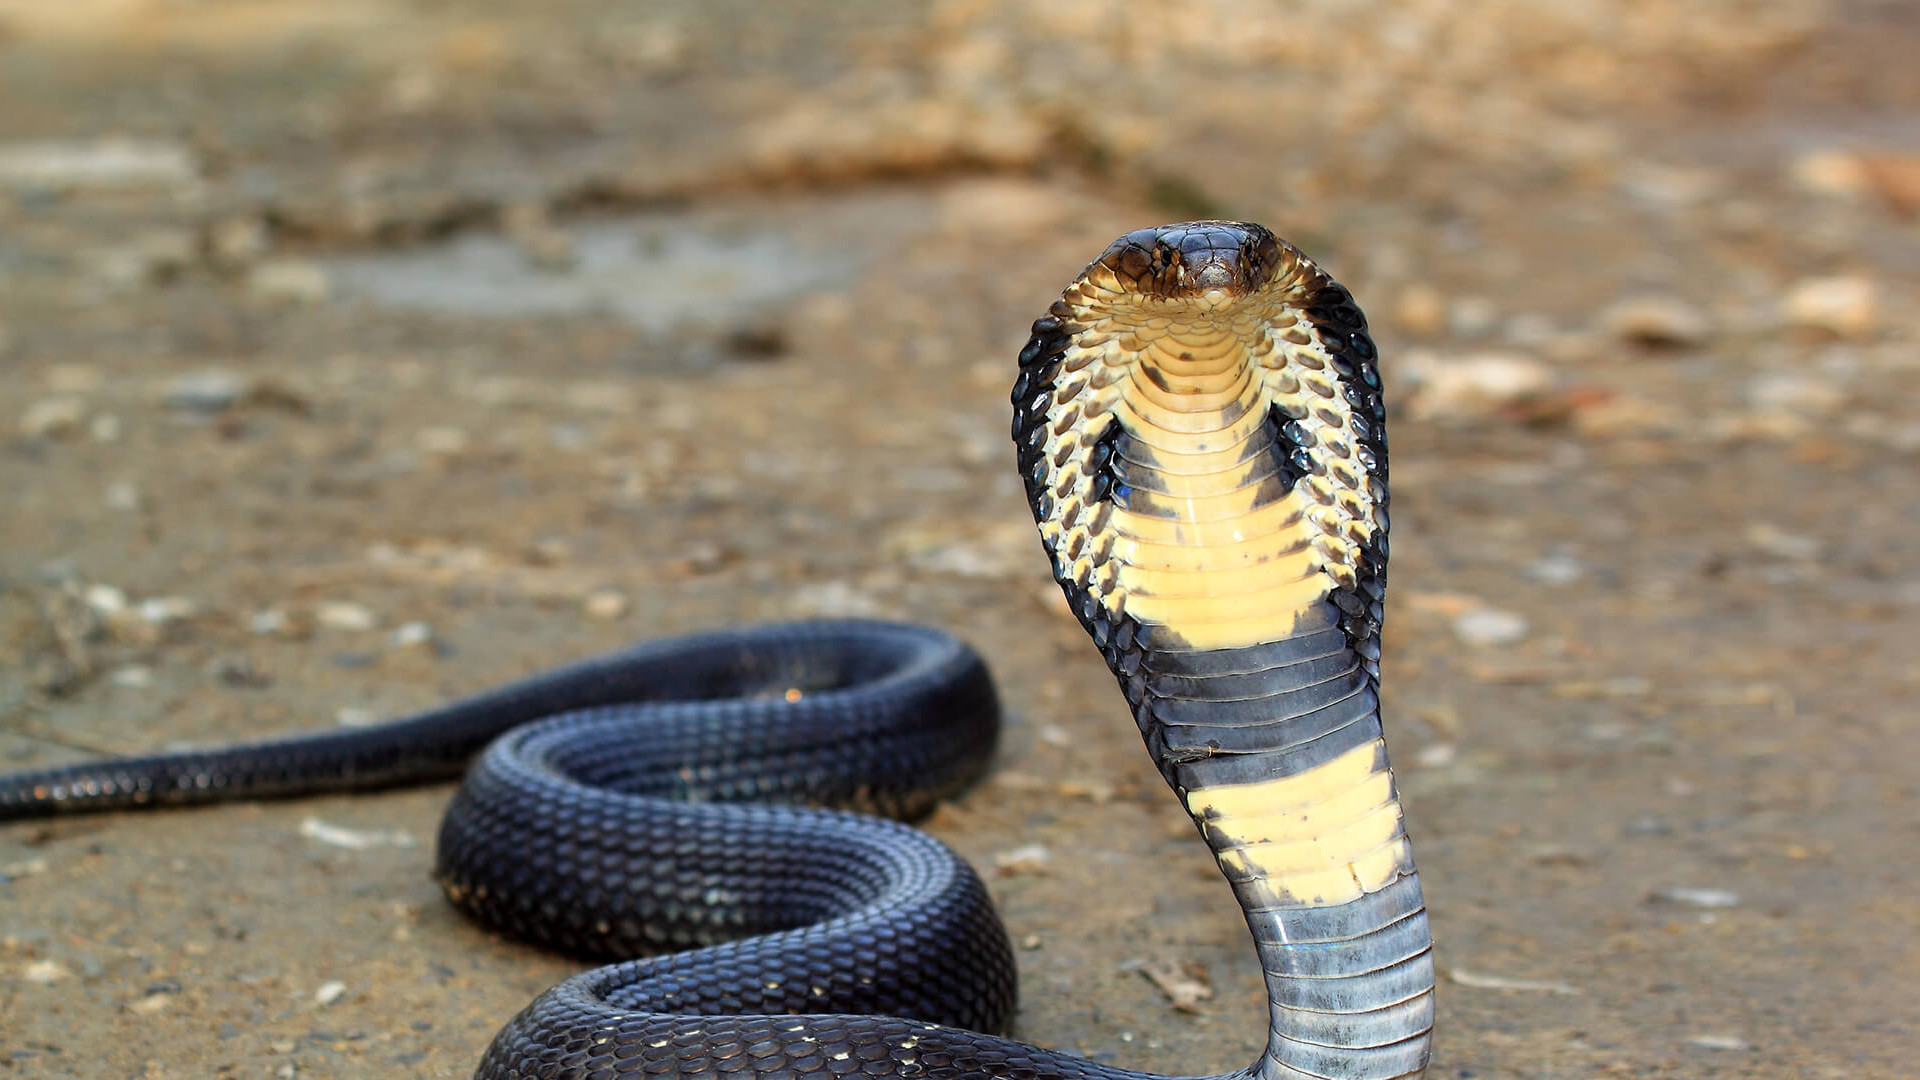 King Cobra With Head Upright On Brown Dirt Ground 
 - King Cobra - HD Wallpaper 